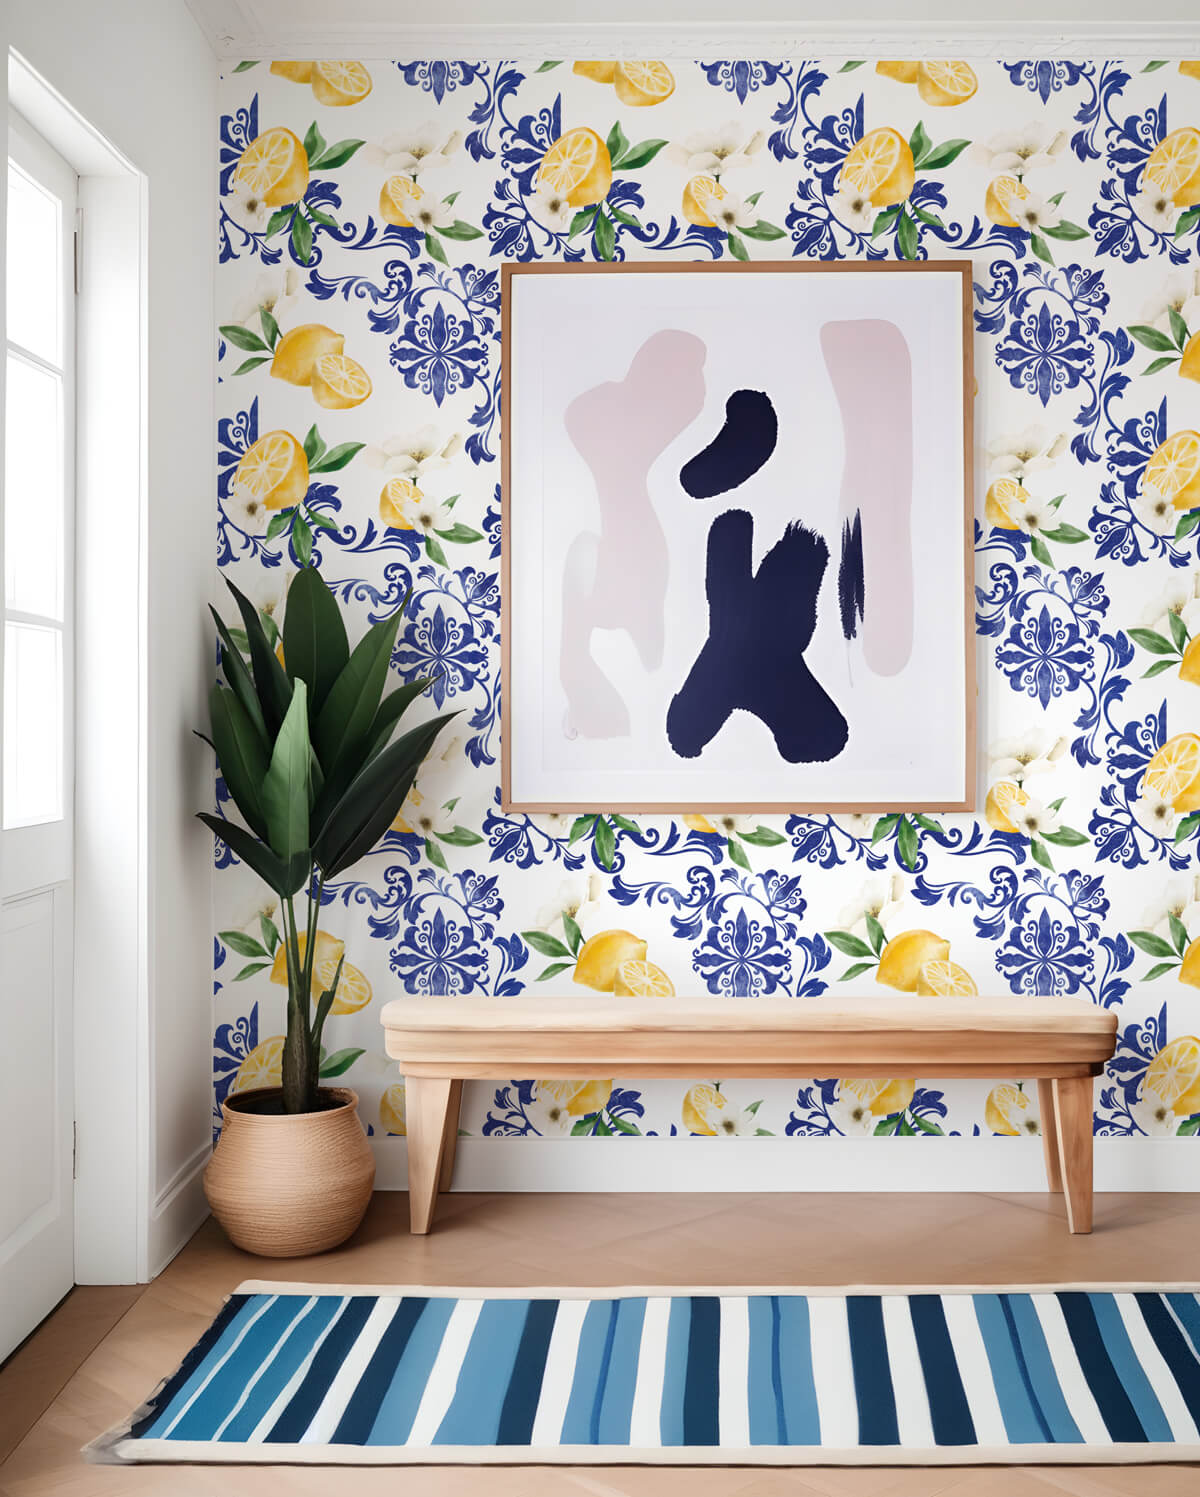 Peel and Stick Wallpaper Designs By Moodthology Papery